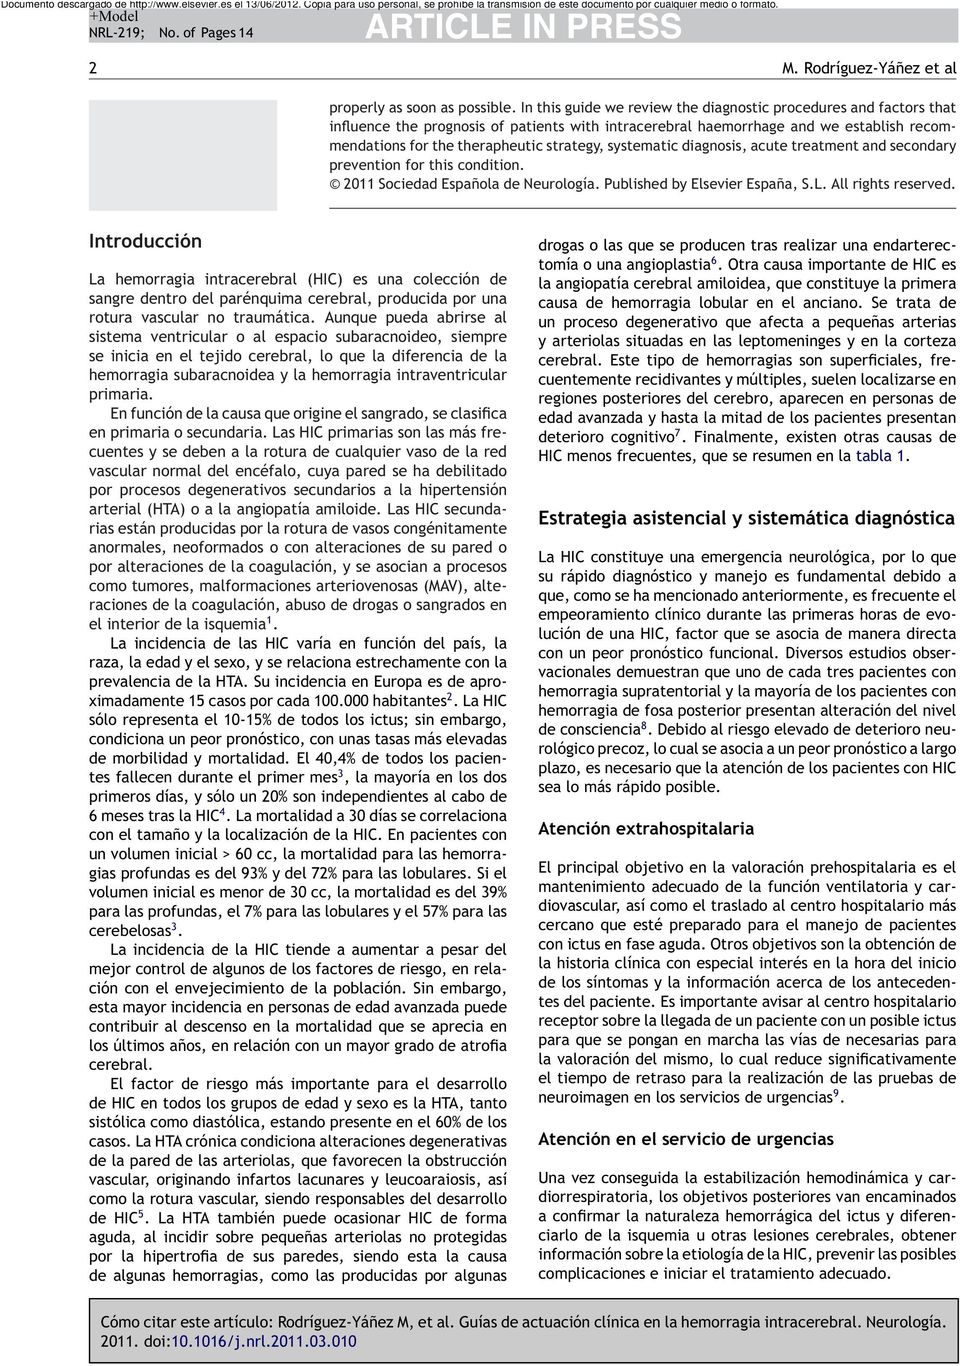 systematic diagnosis, acute treatment and secondary prevention for this condition. 2011 Sociedad Española de Neurología. Published by Elsevier España, S.L. All rights reserved.